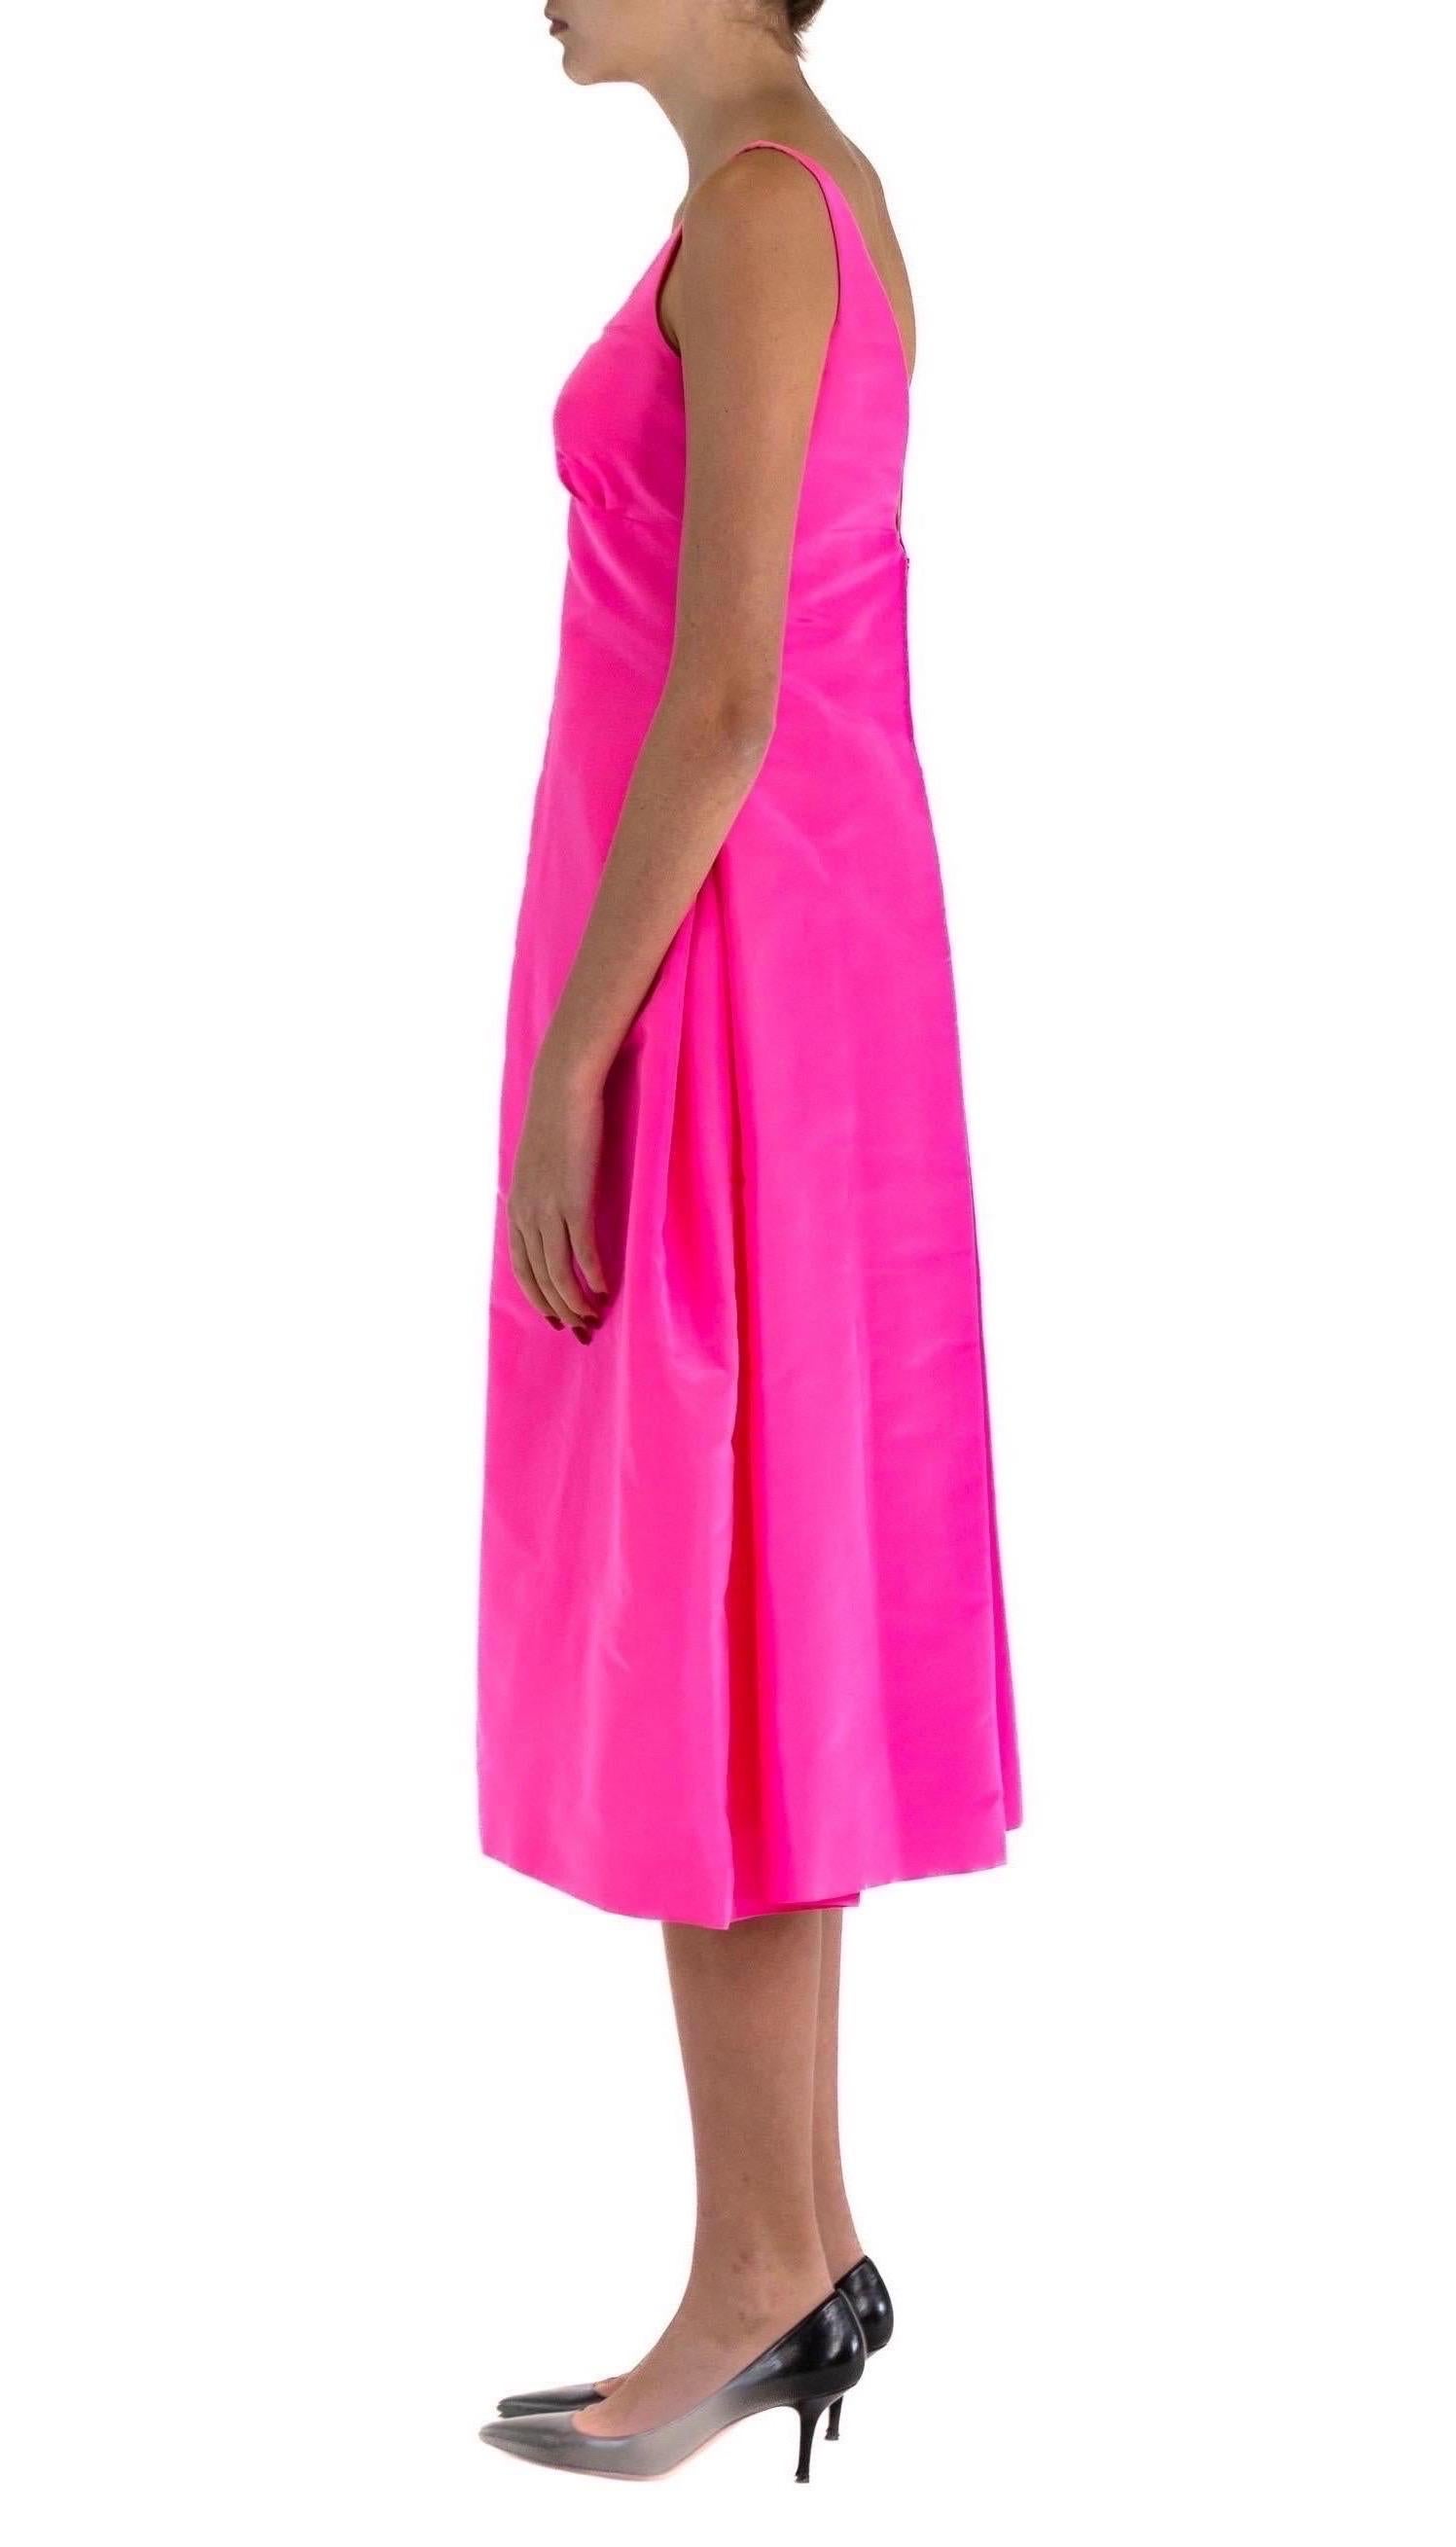 1990S ISAAC MIZRAHI Hot Pink Silk Faille Cocktail Dress In Excellent Condition For Sale In New York, NY